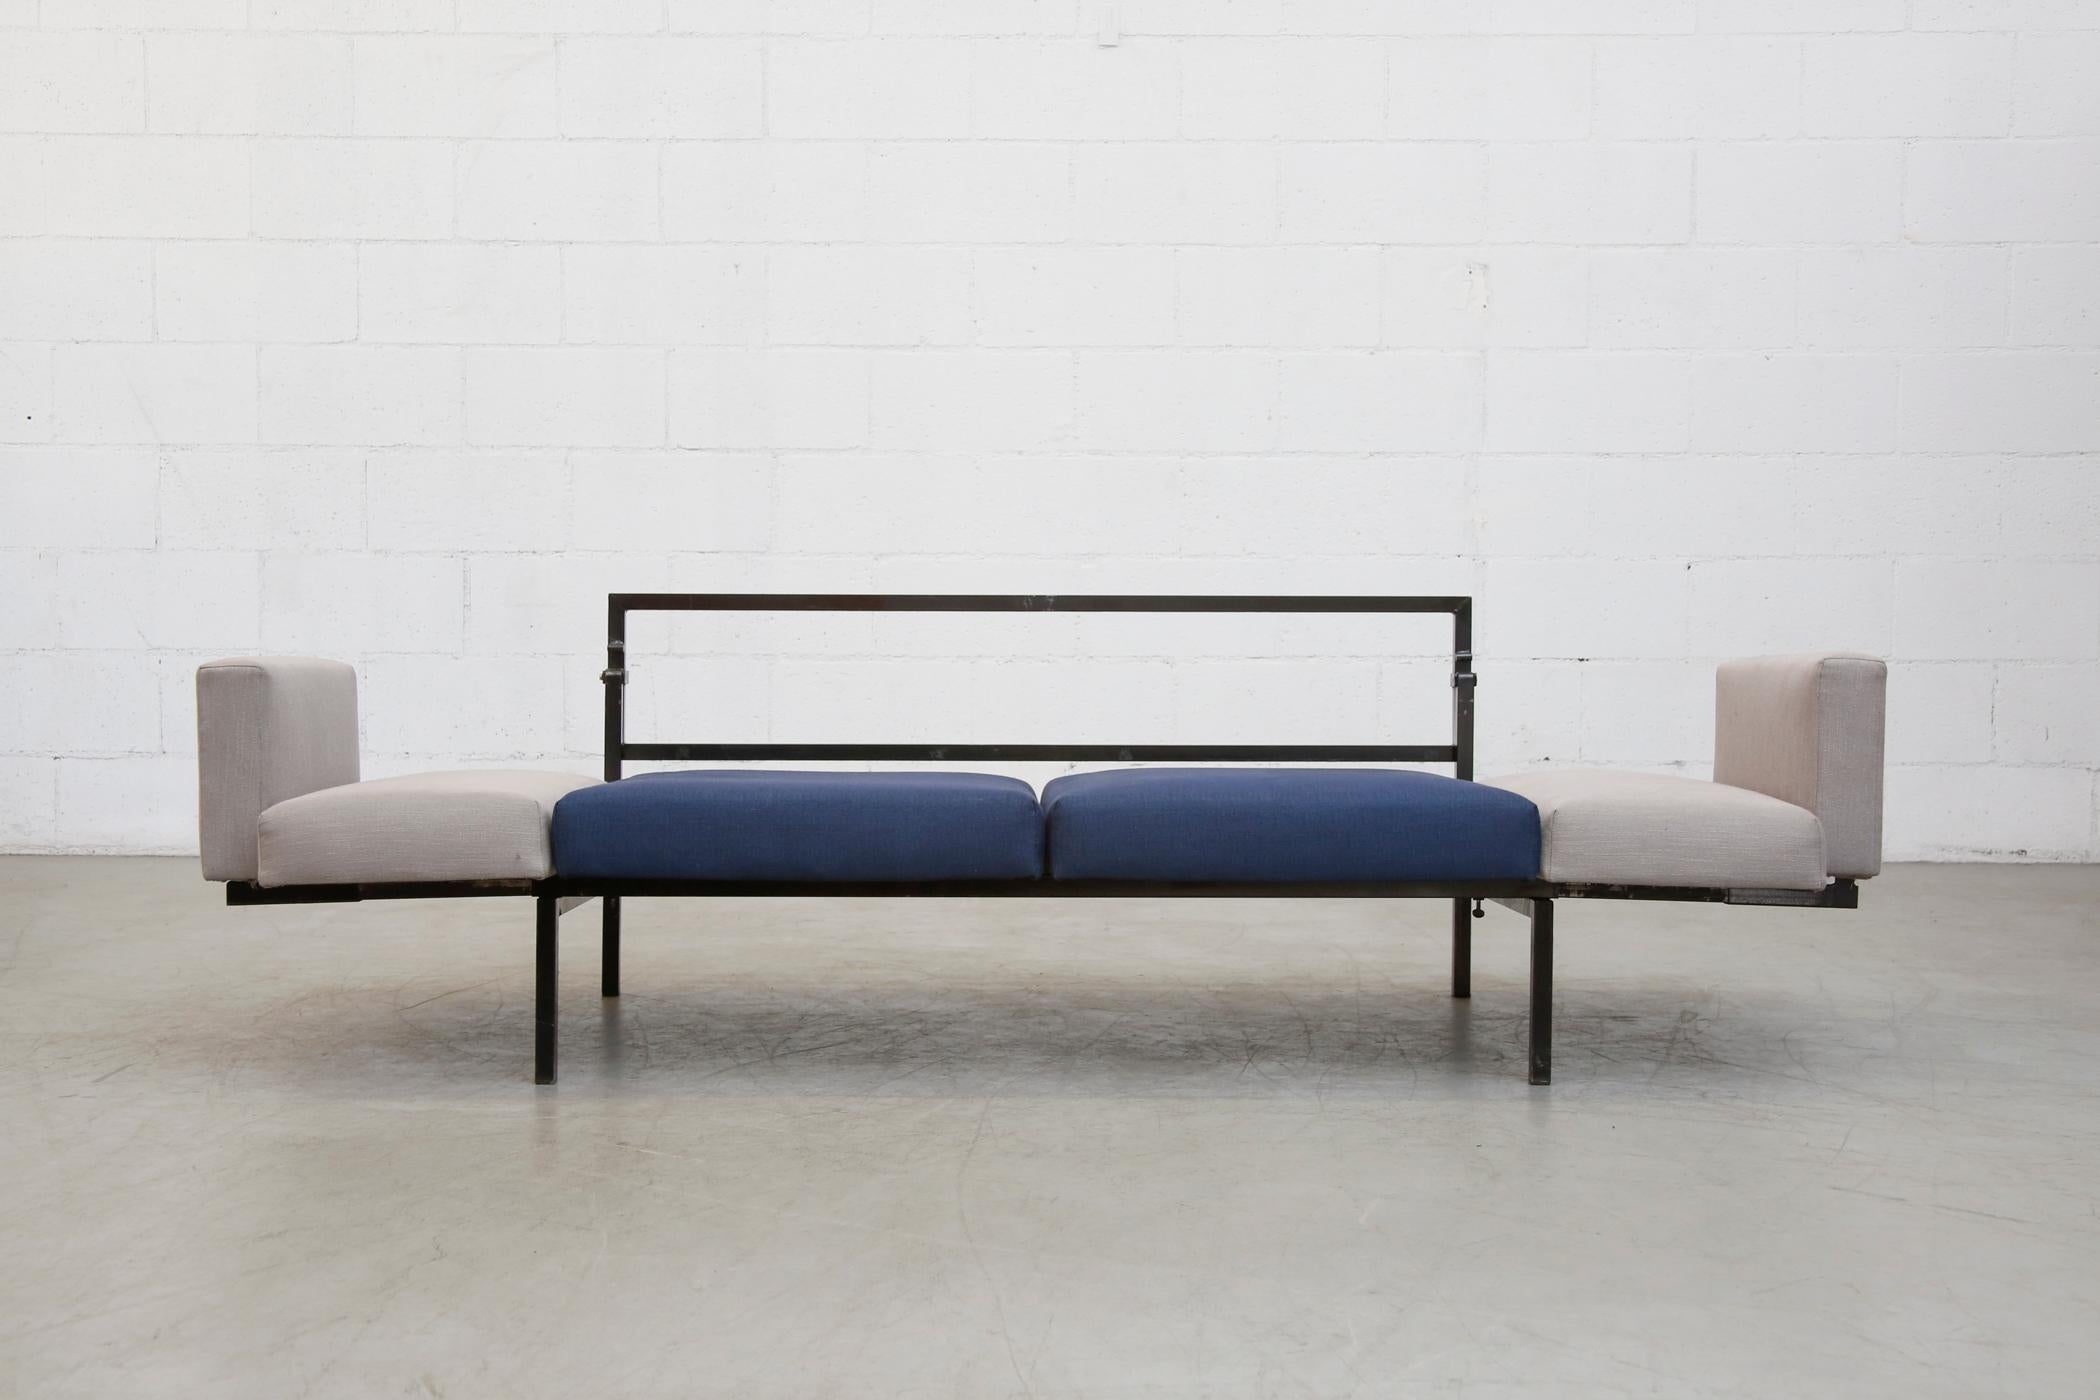 Coen de Vries Gray and Blue Sleeper Sofa from Pilastro In Good Condition For Sale In Los Angeles, CA